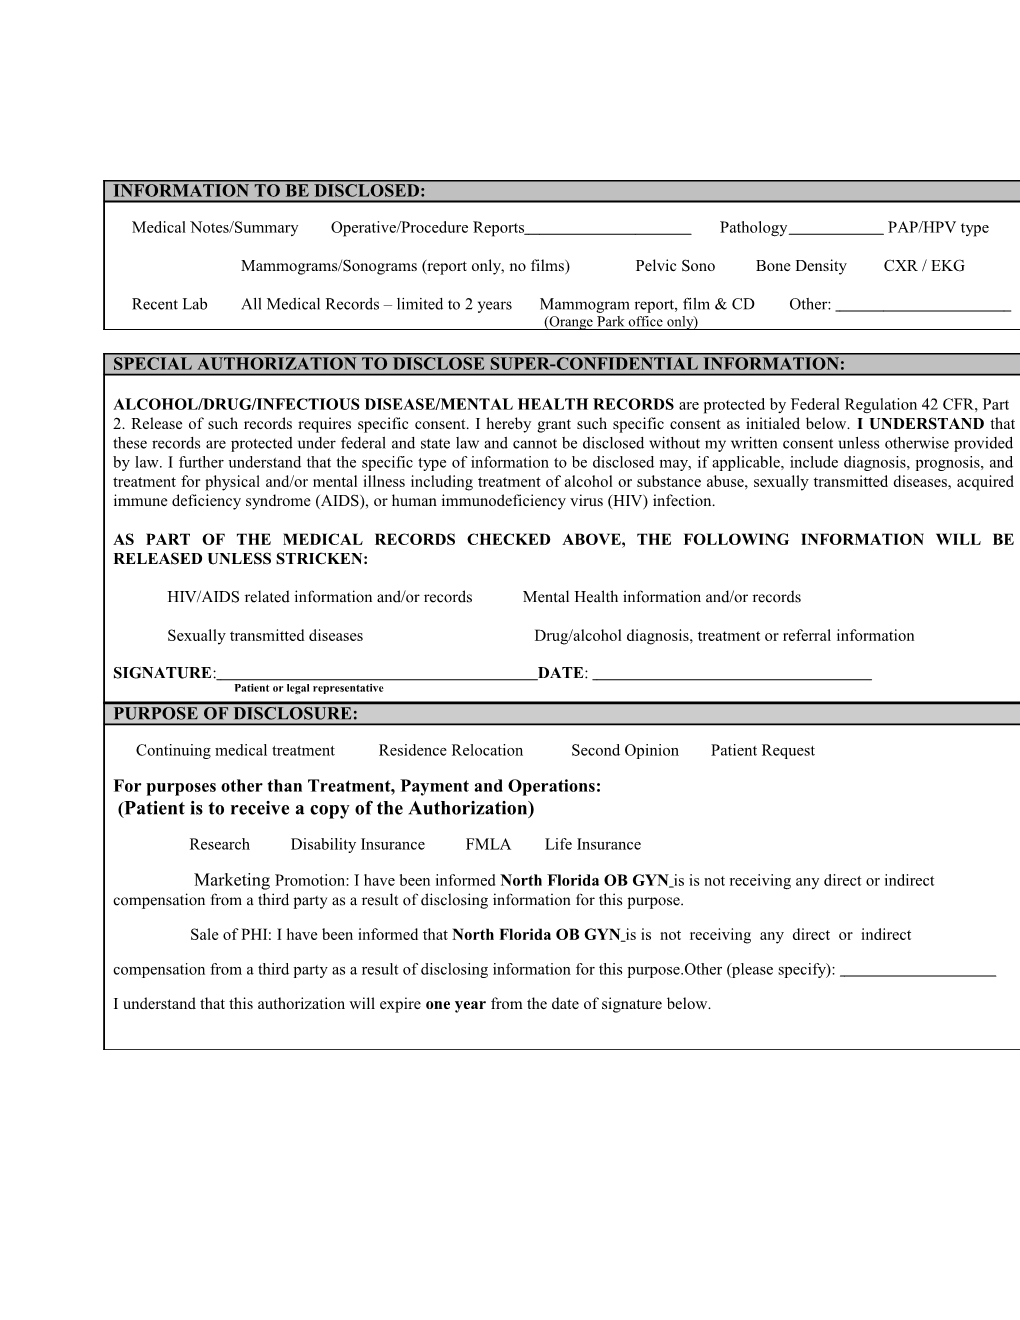 Med Record Release Authorization Form July 5, 2013 (00286087)